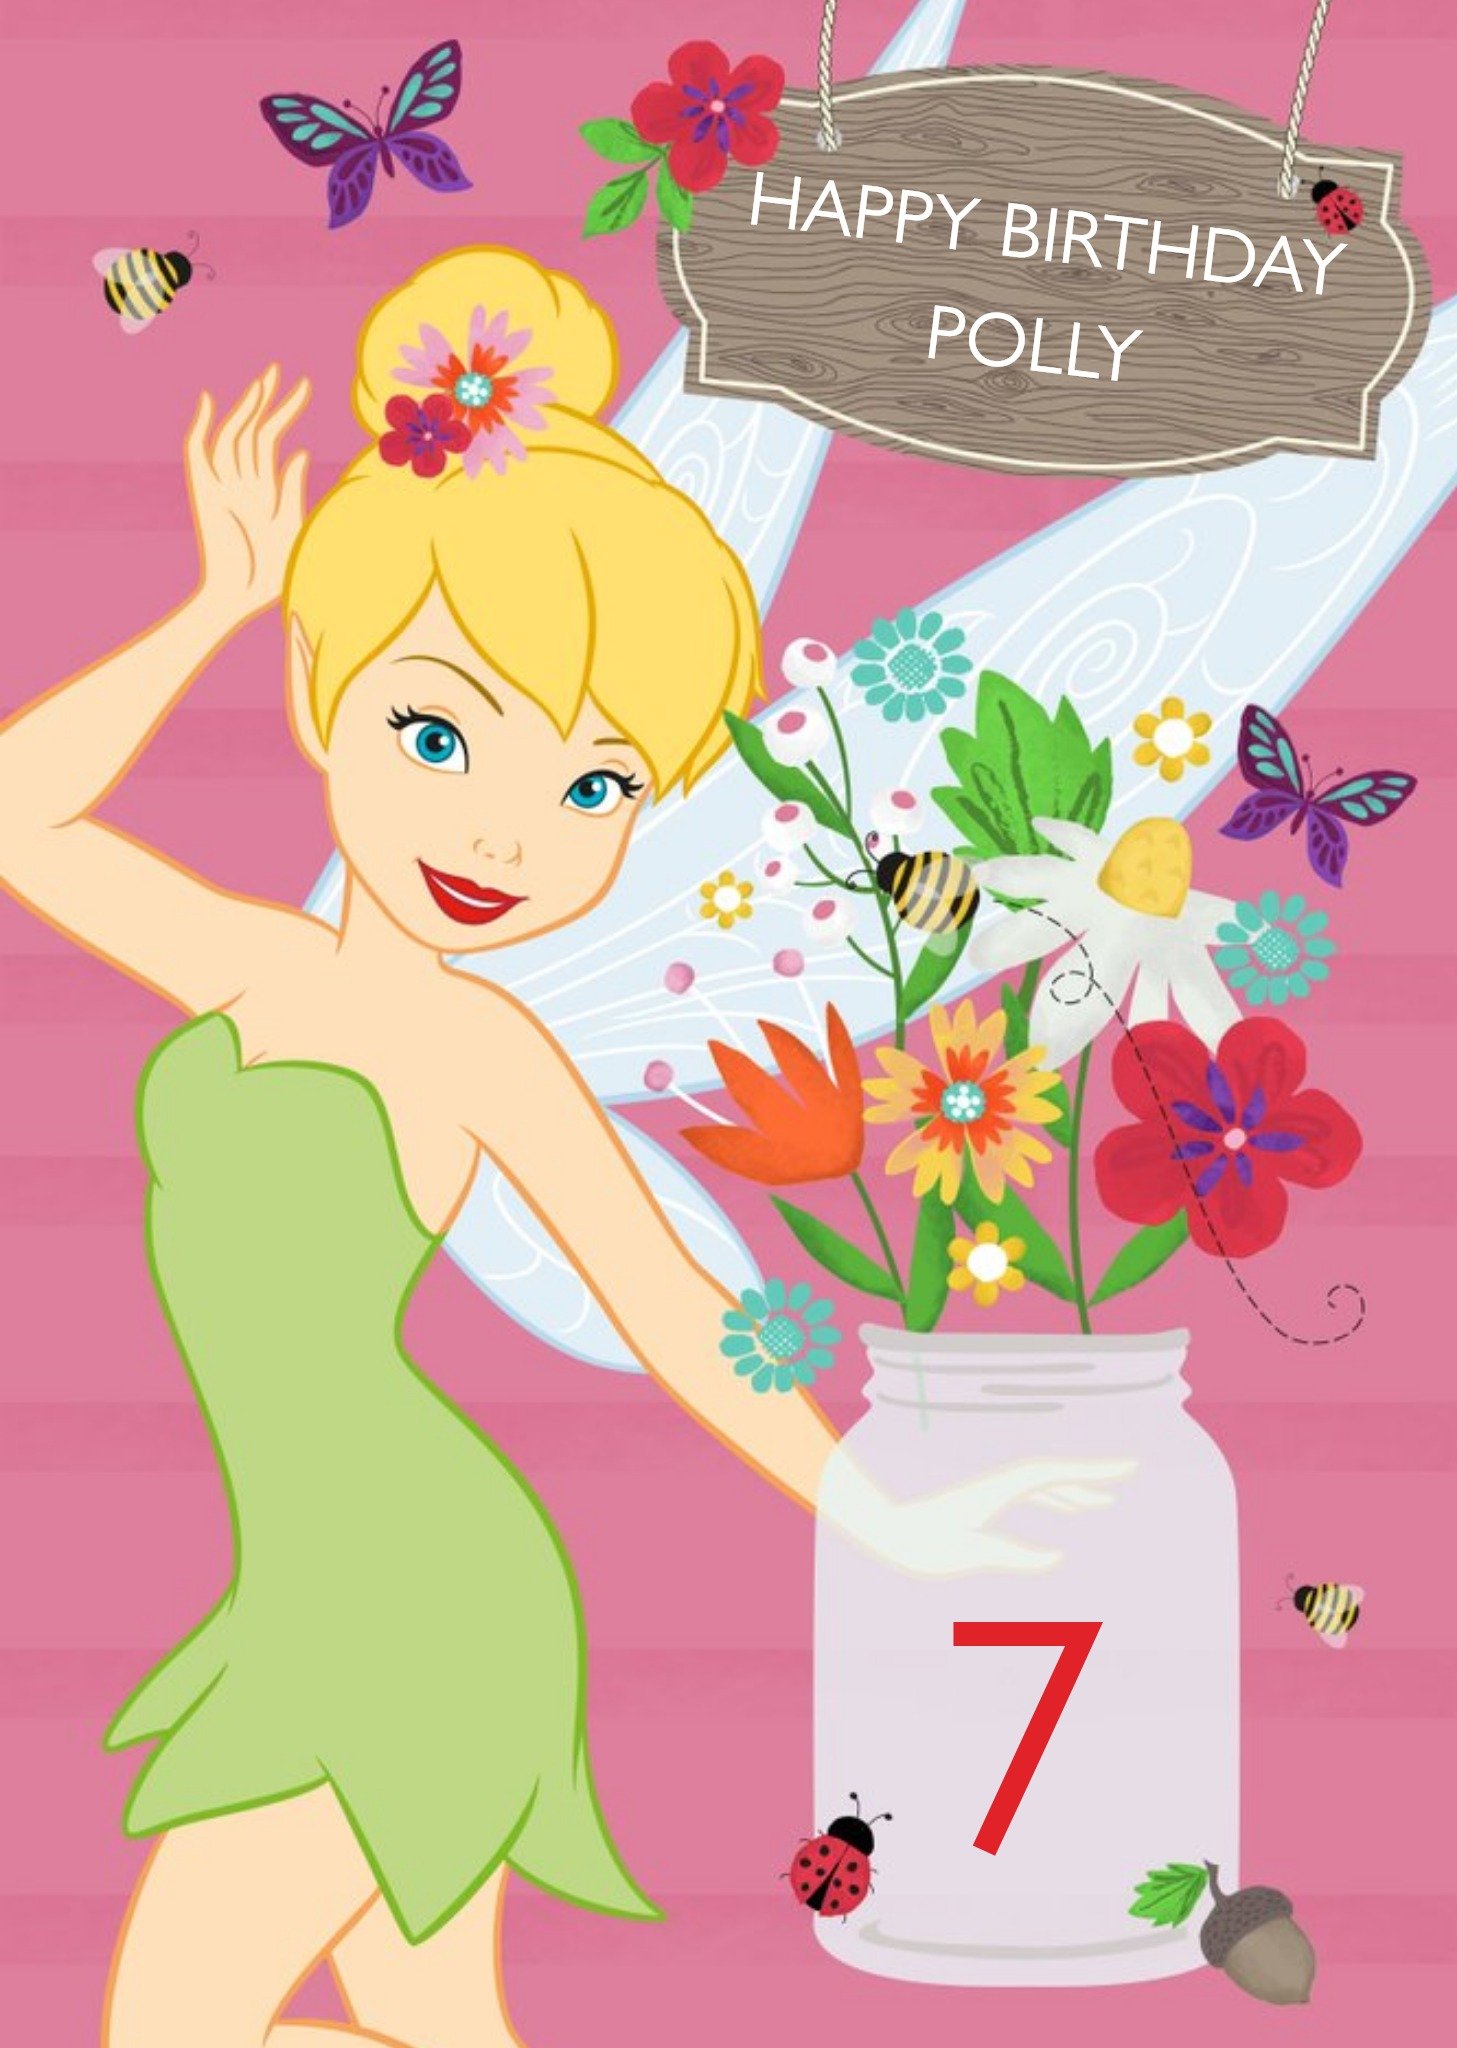 Disney Tinkerbell And Jar Of Flowers Personalised Happy Birthday Card, Large